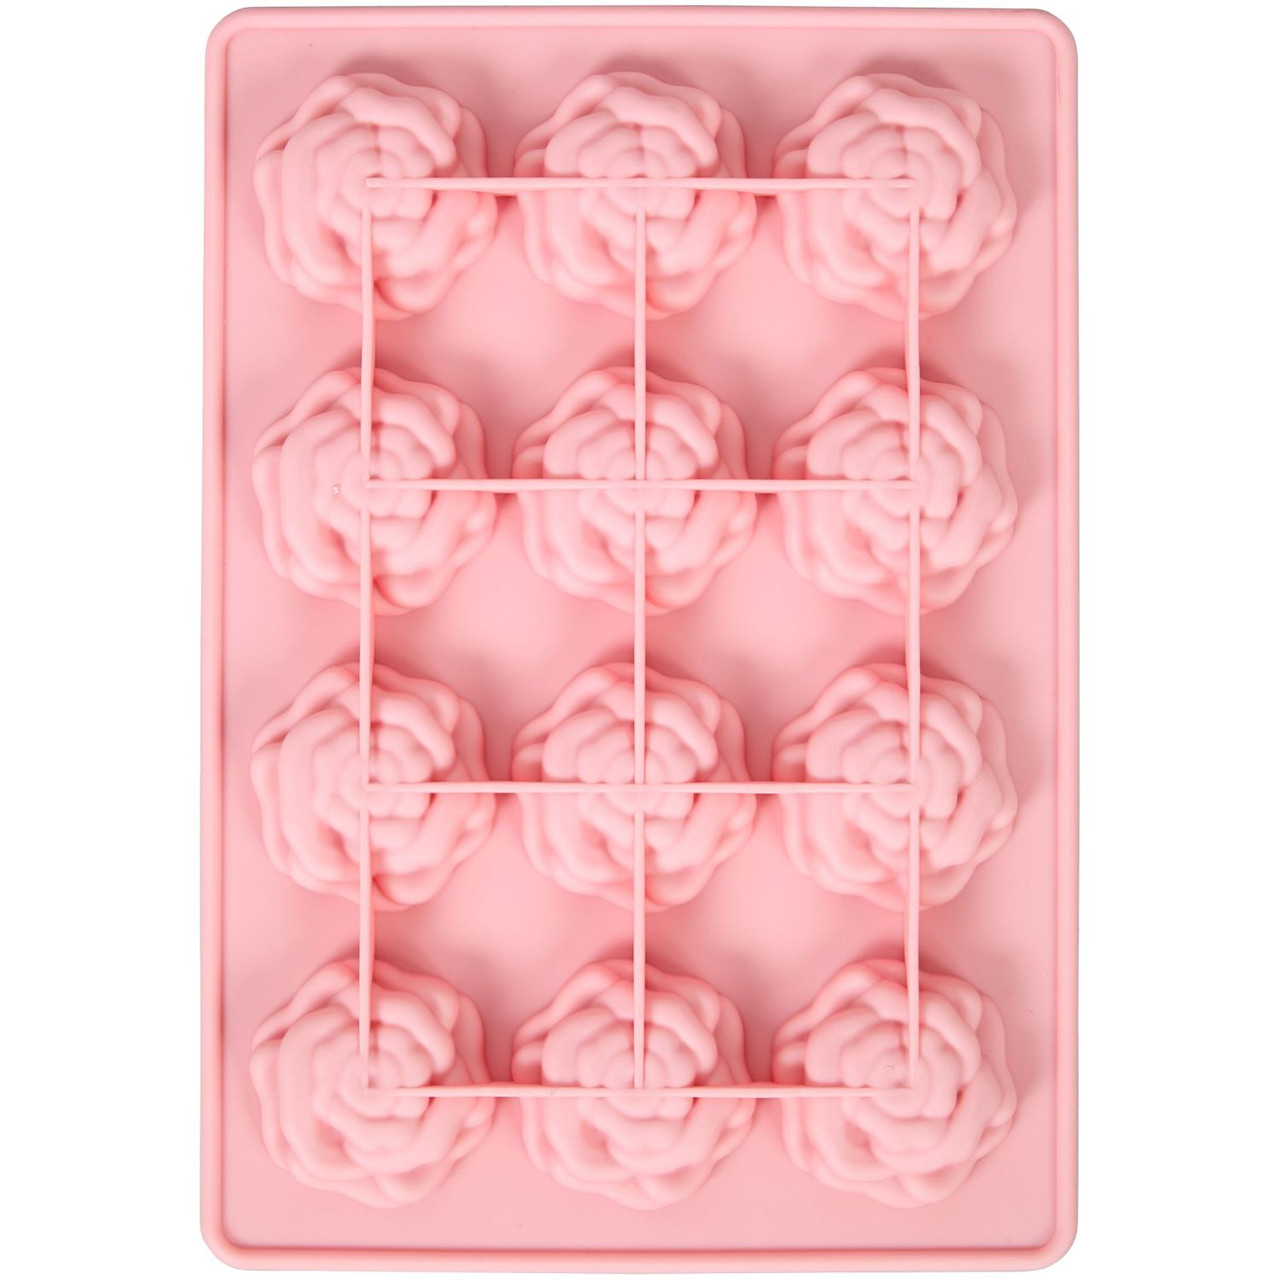 12-Cavity Rose Mold Silicone Cake Decorating Tool Sugar Resin Chocolate  Fondant Mould - Price history & Review, AliExpress Seller - GBhouse Boowan  Nicole Authorized Reseller Store